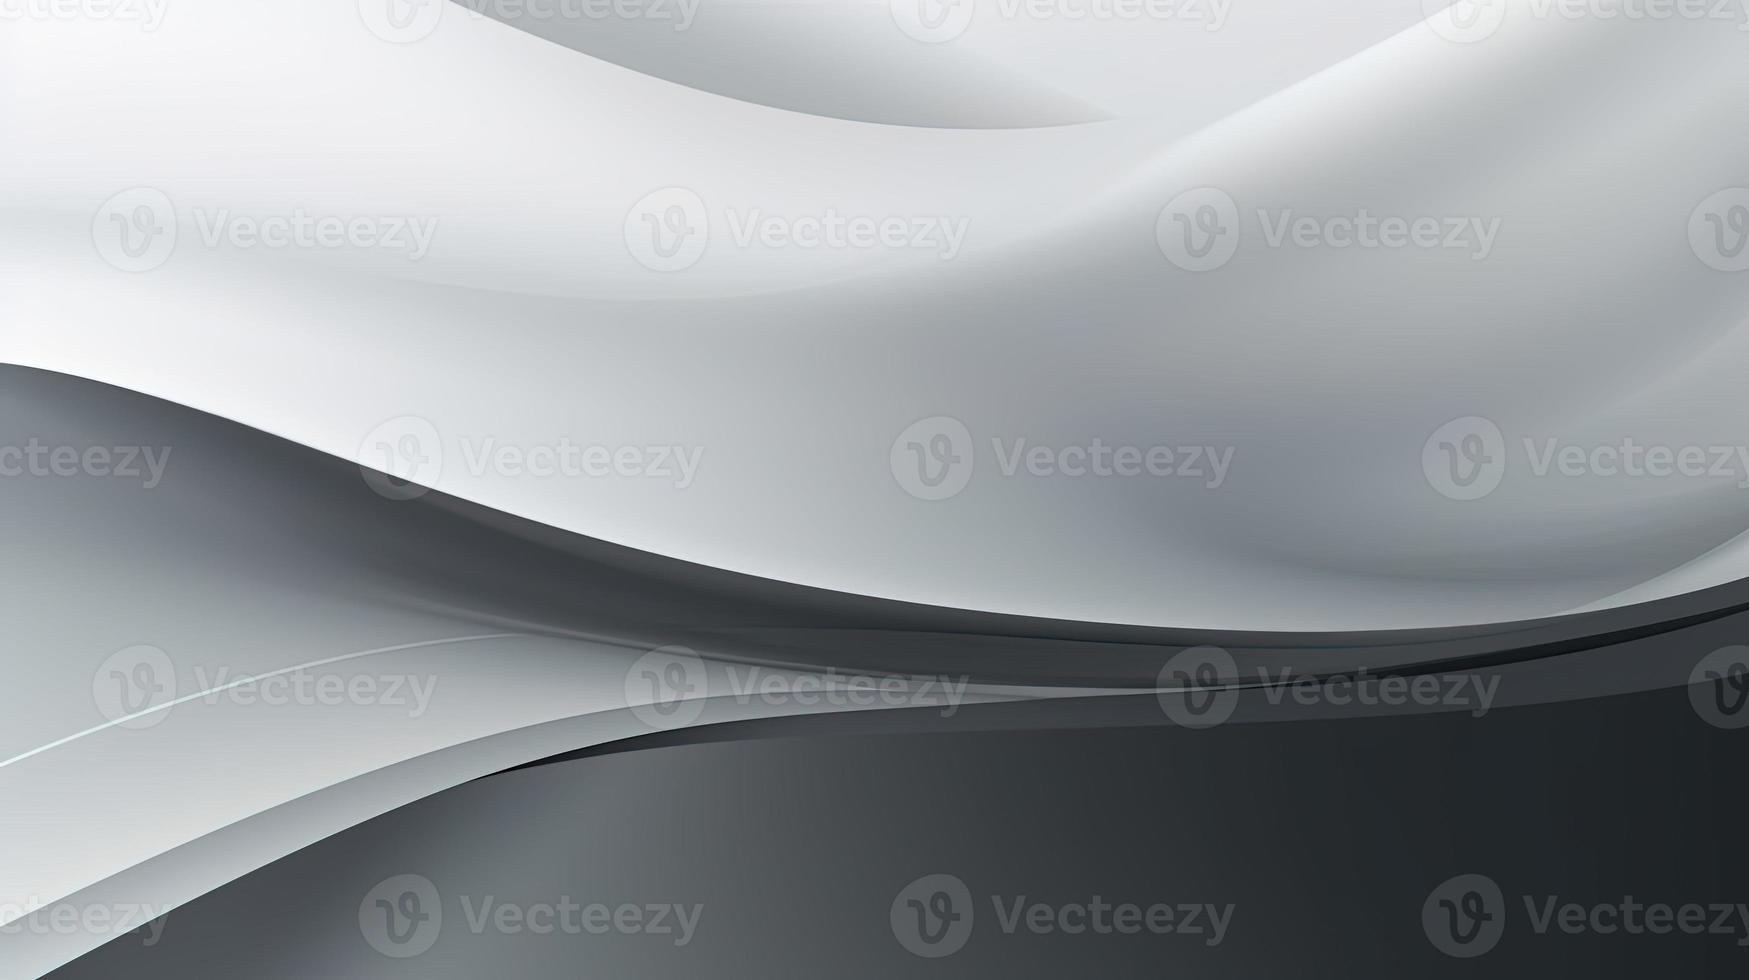 abstract background with smooth lines in gray colors, 3d illustration photo